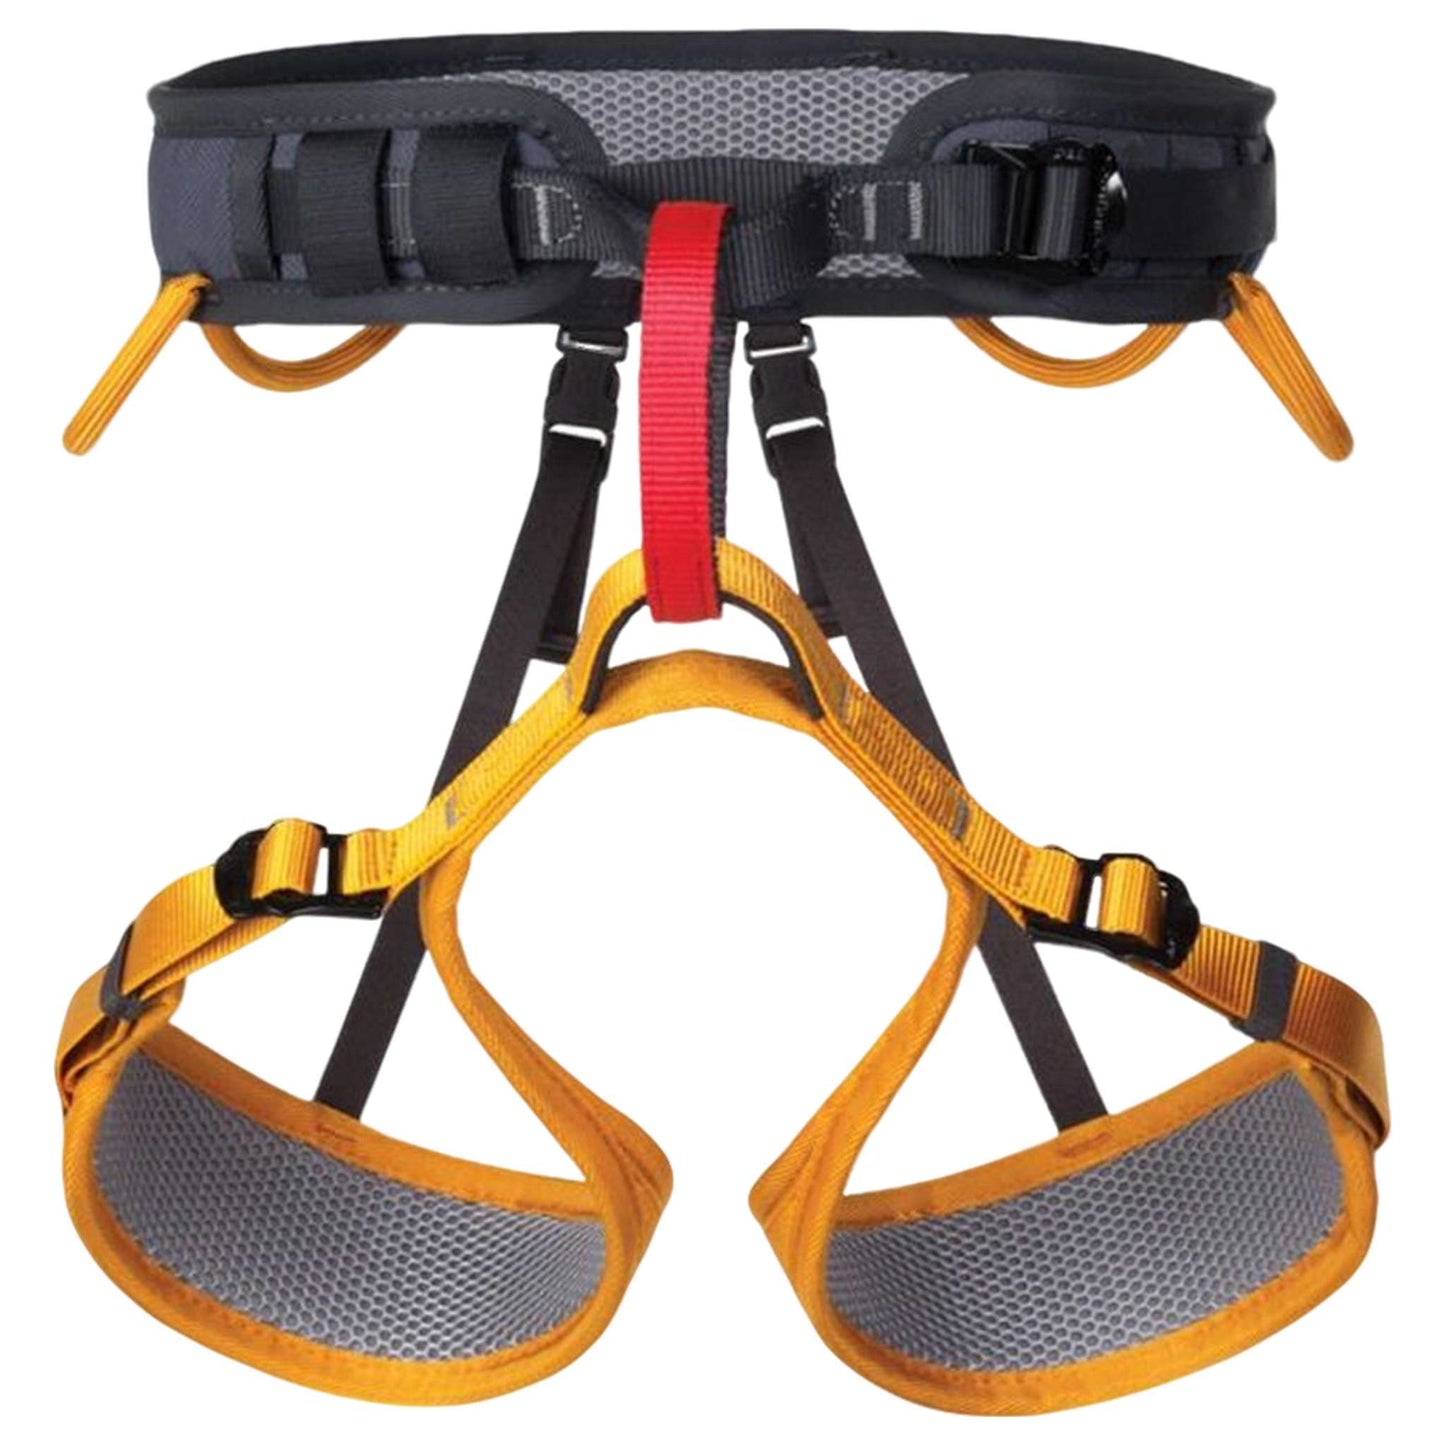 Gym Packet - Complete Climbing Gear Set for Indoor and Single Pitch Enthusiasts